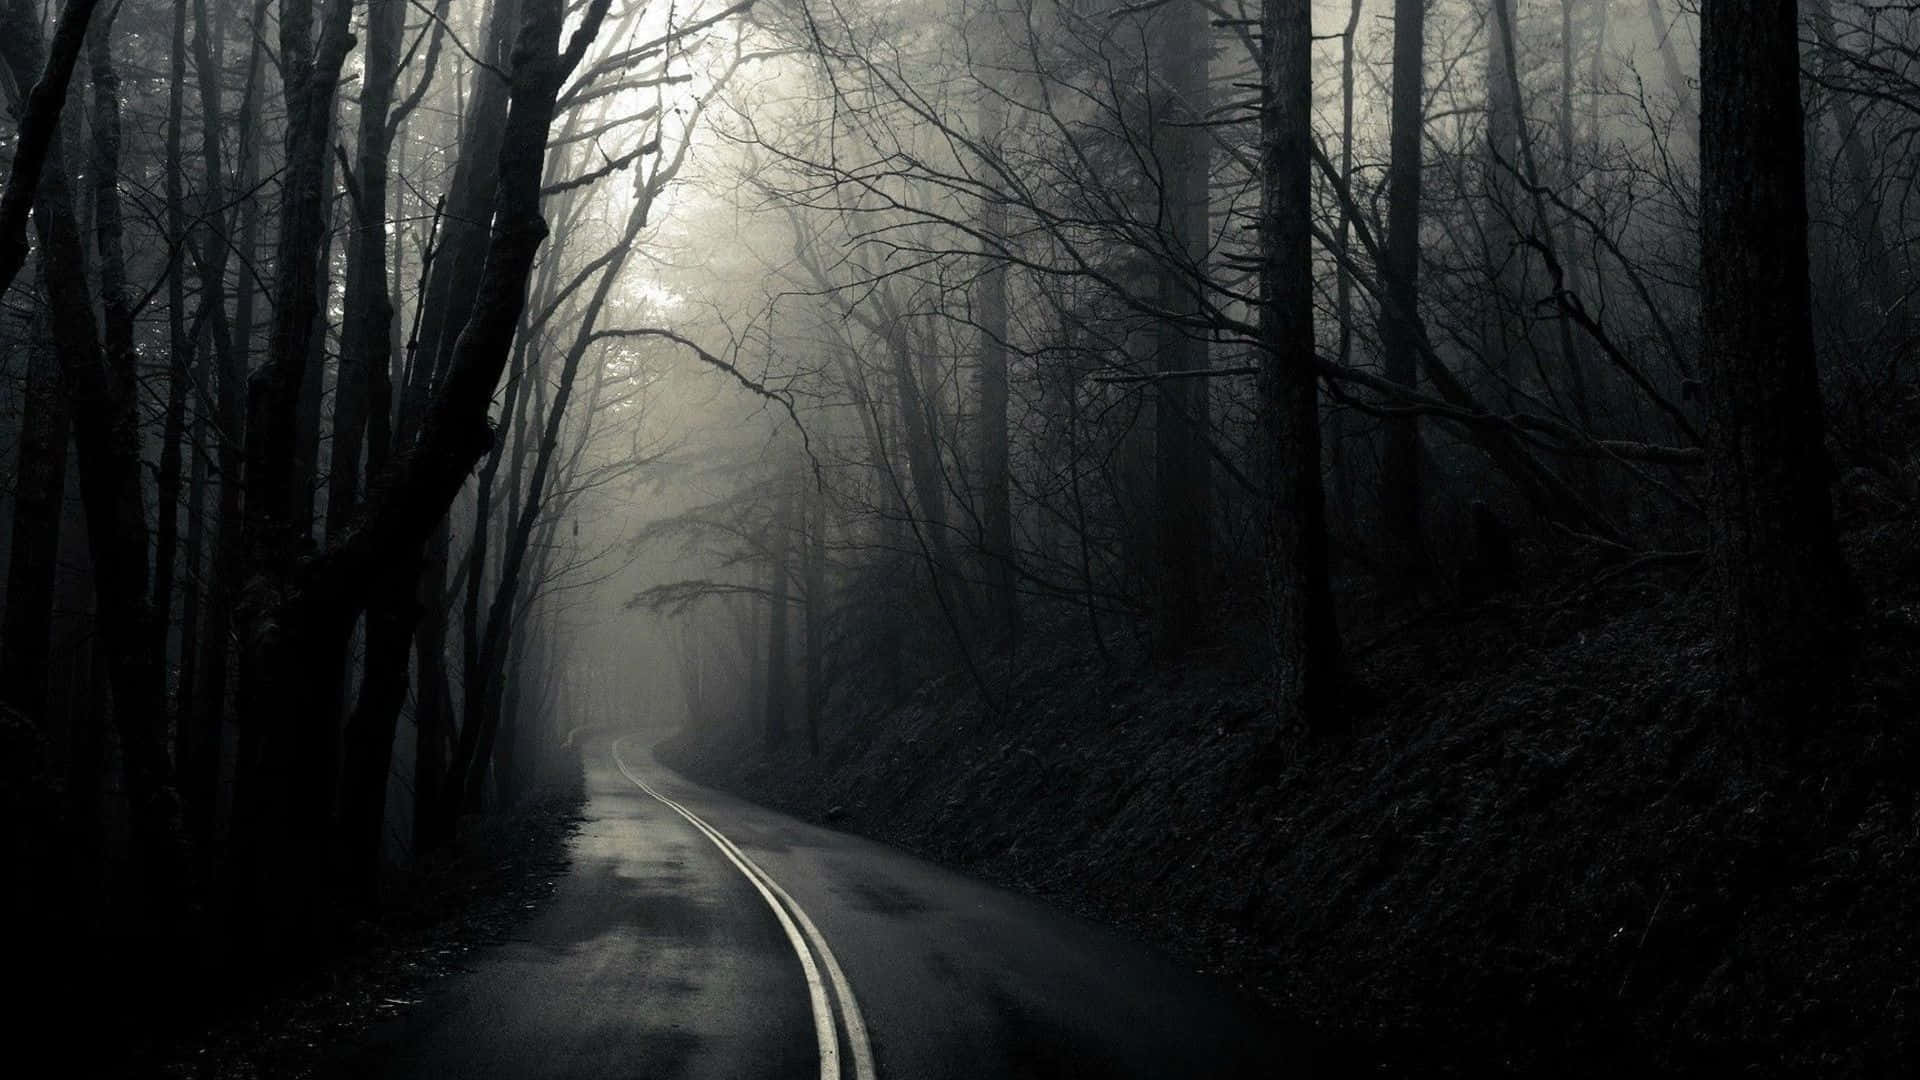 A Mysterious Journey Down a Dark Road Wallpaper